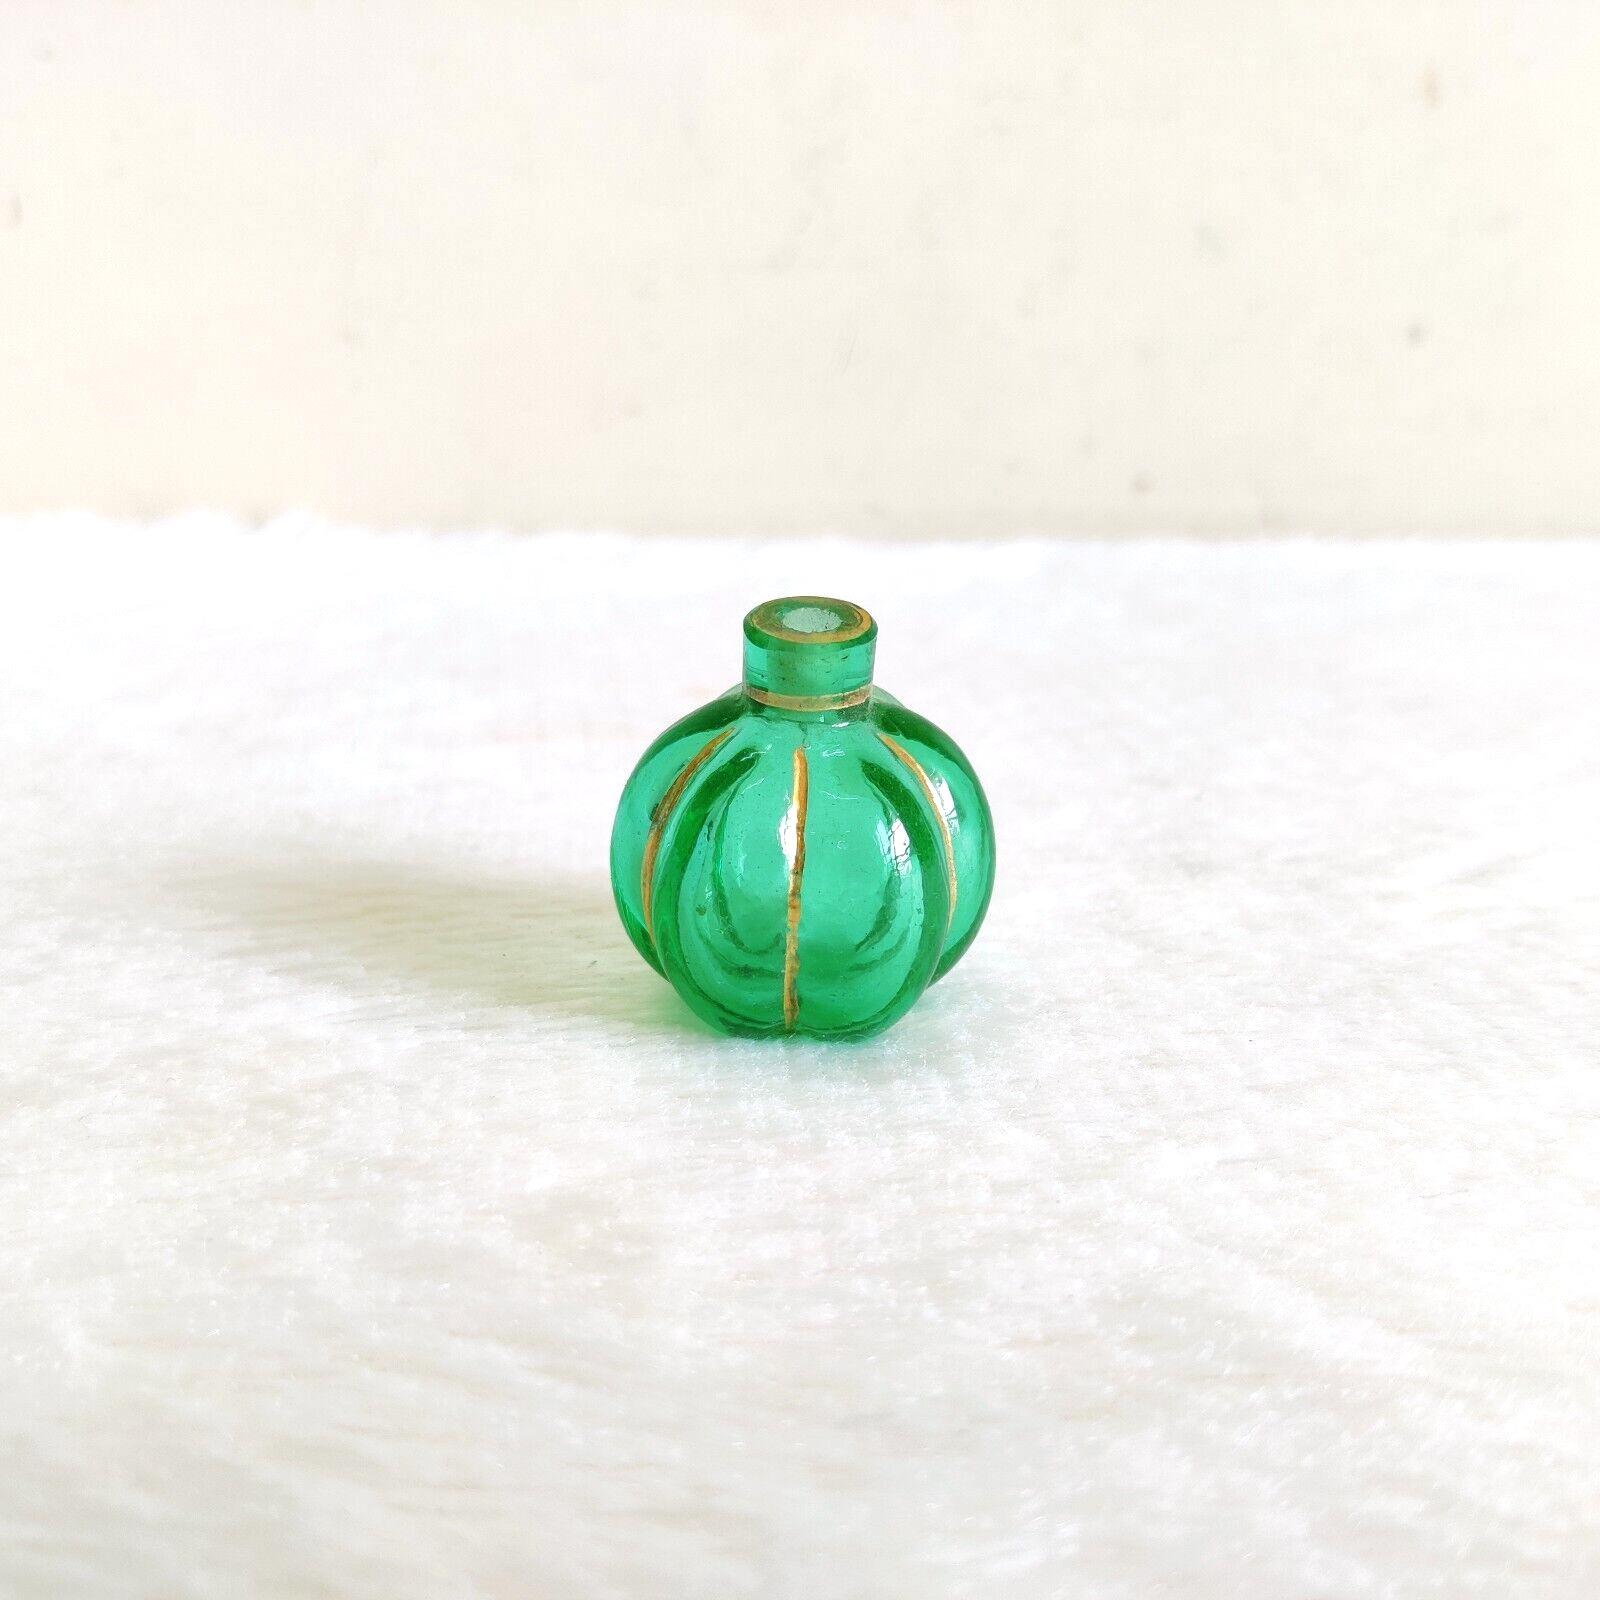 19 Vintage Victorian Green Glass Perfume Bottle Golden Work Old Collectible G892